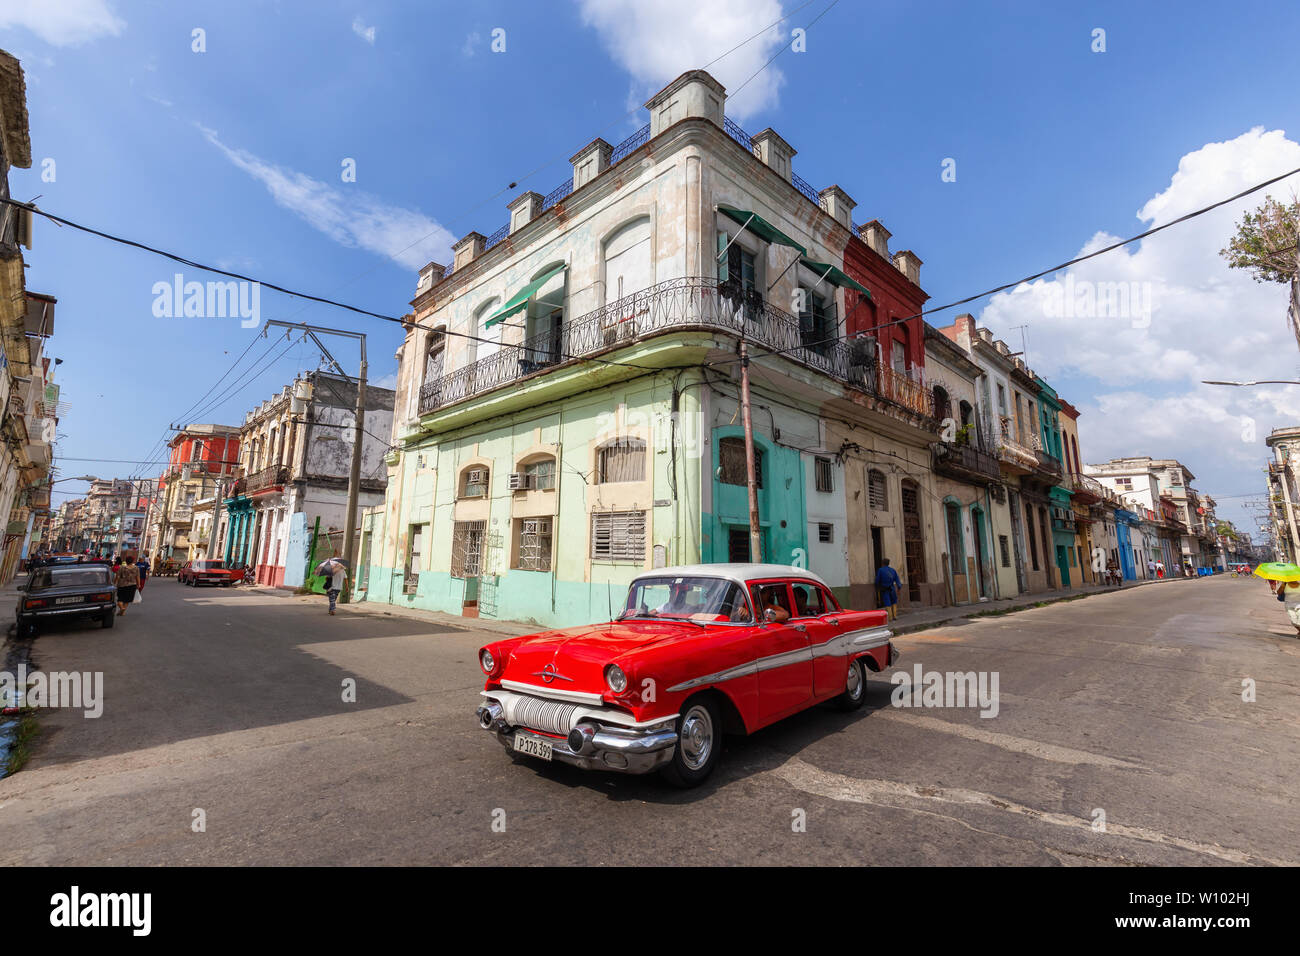 Havana, Cuba - May 14, 2019: Classic Old Taxi Car in the streets of the Old Havana City during a vibrant and bright sunny morning. Stock Photo